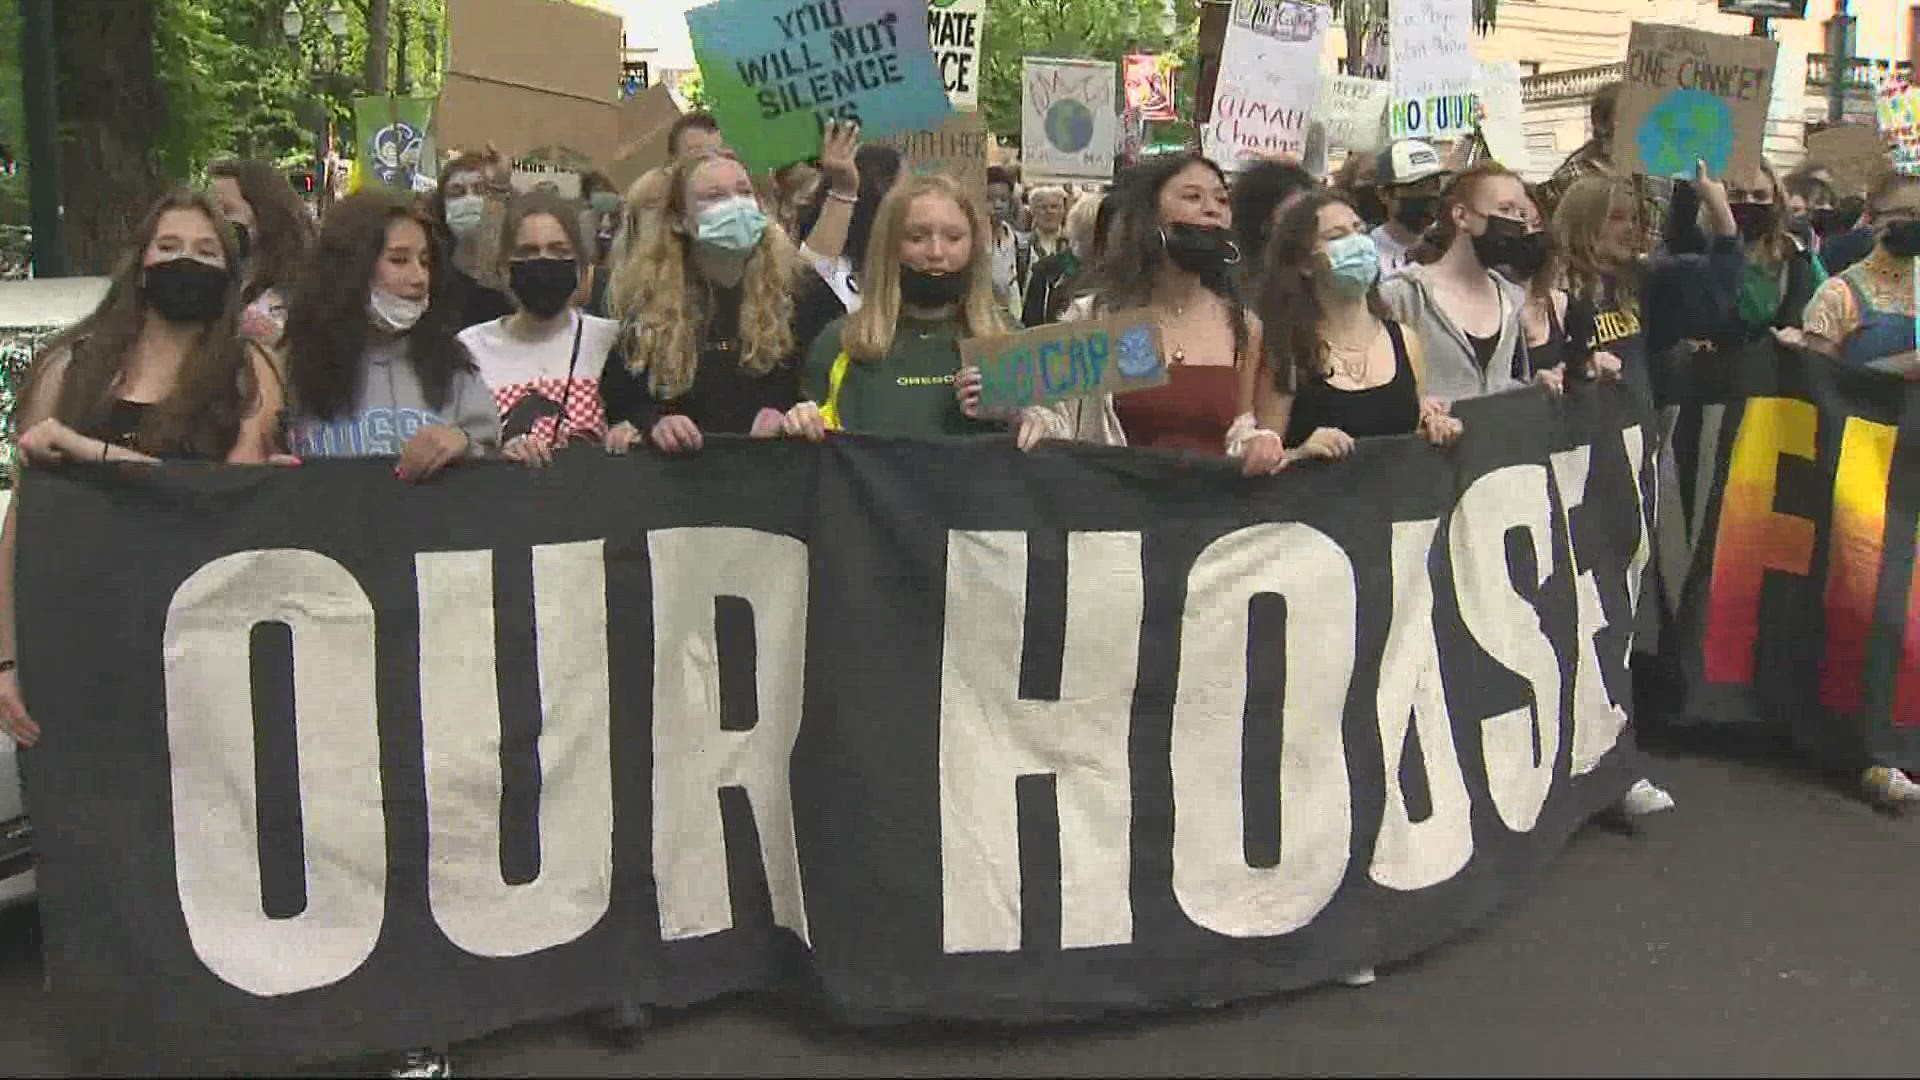 Hundreds of students walked out of class Friday for a climate strike. A large crowd rallied at Portland City Hall before marching through the city.